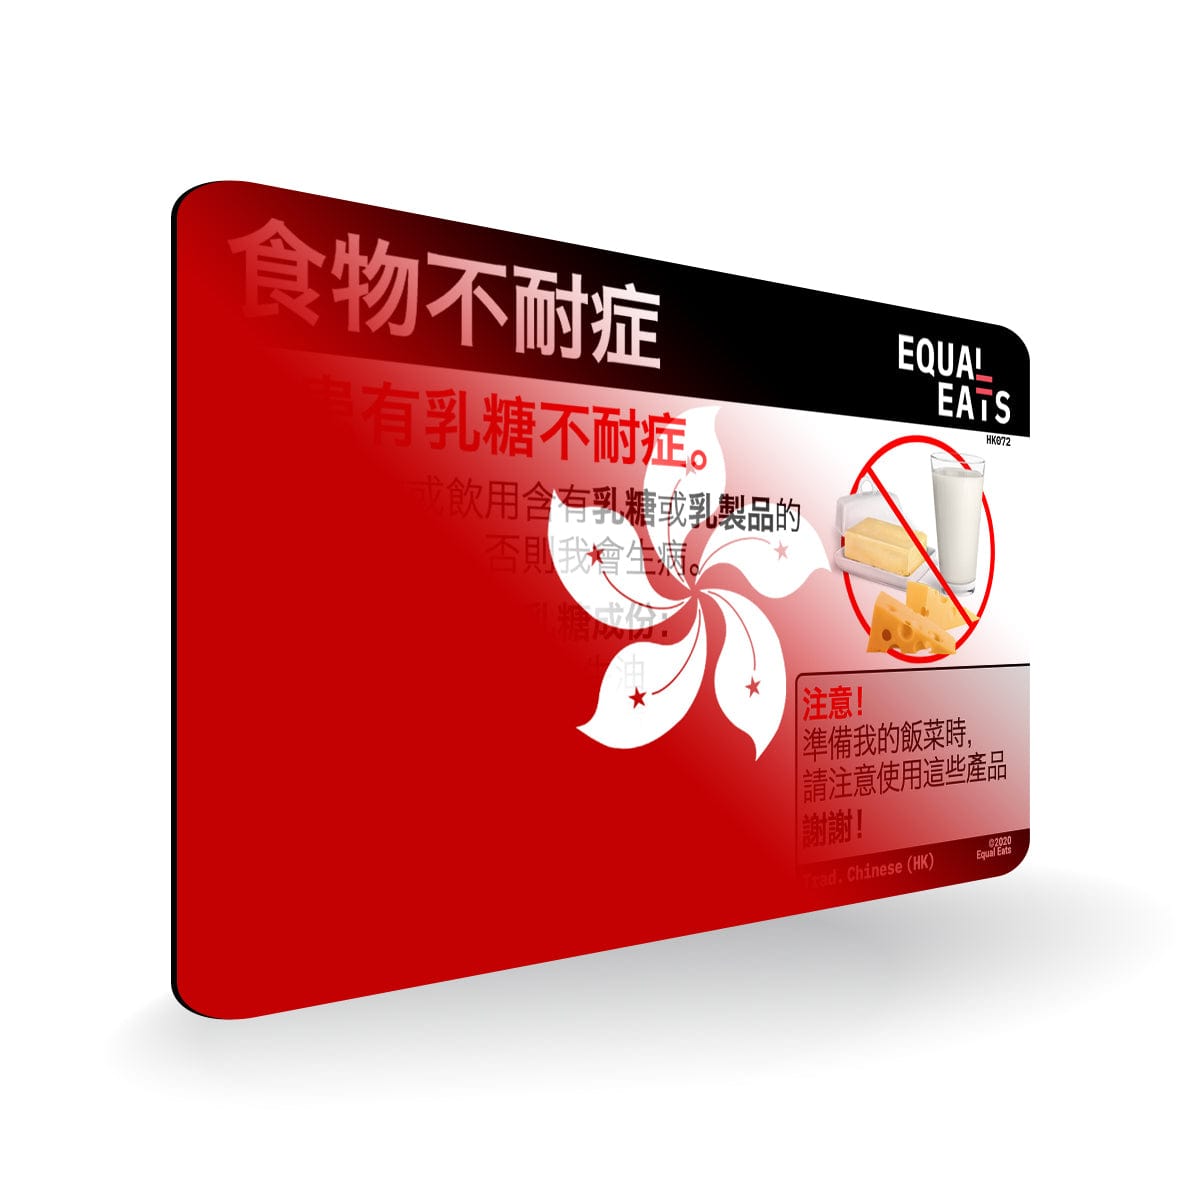 Lactose Intolerance in Traditional Chinese. Lactose Intolerant Card for Hong Kong